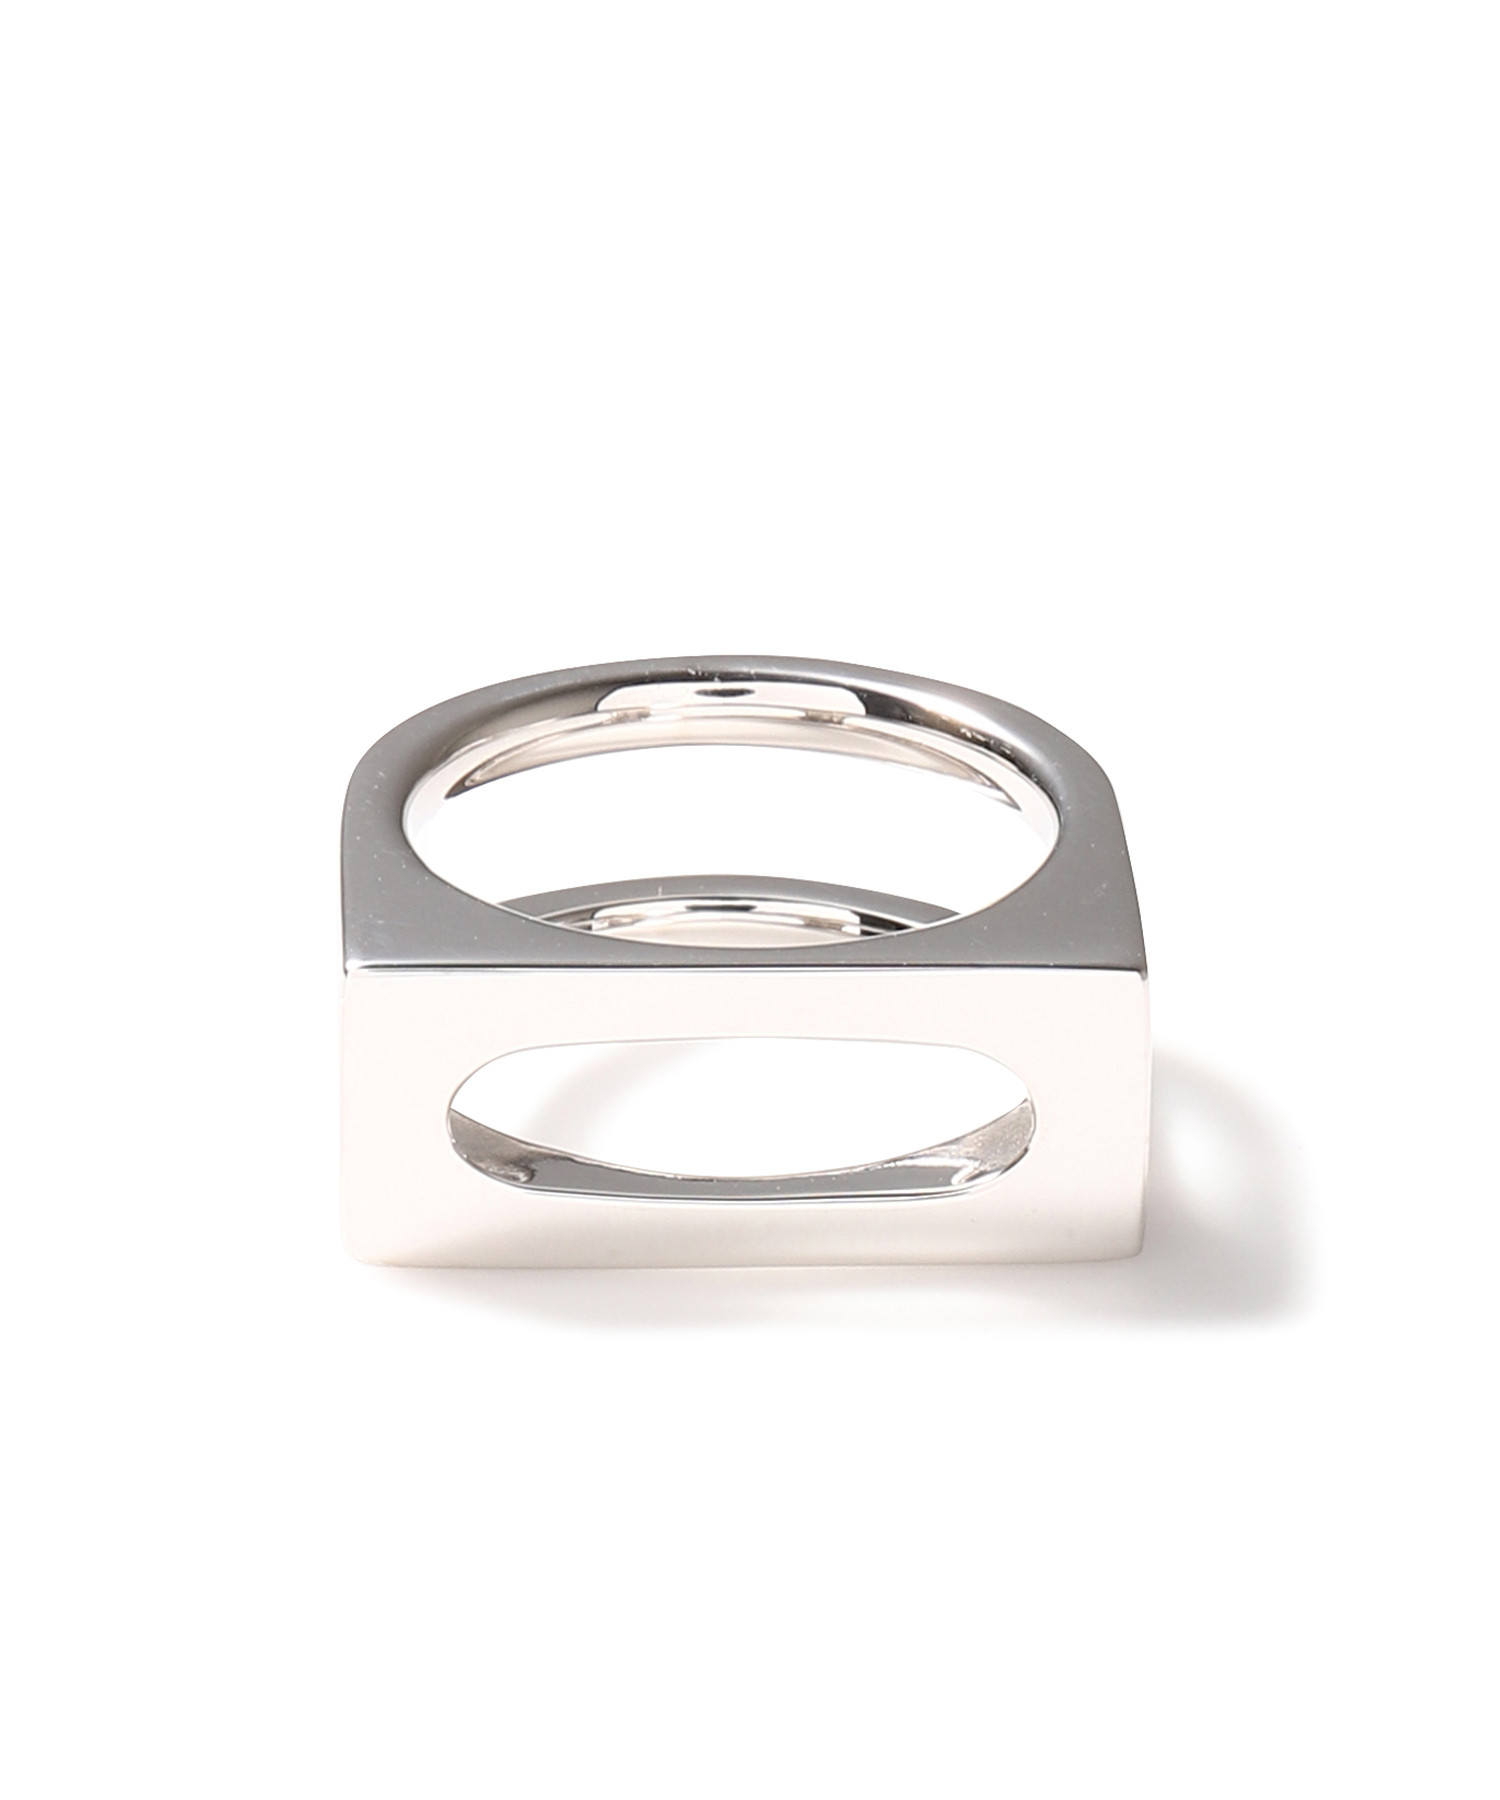 Cage Ring Single（TOMWOOD）｜TATRAS CONCEPT STORE